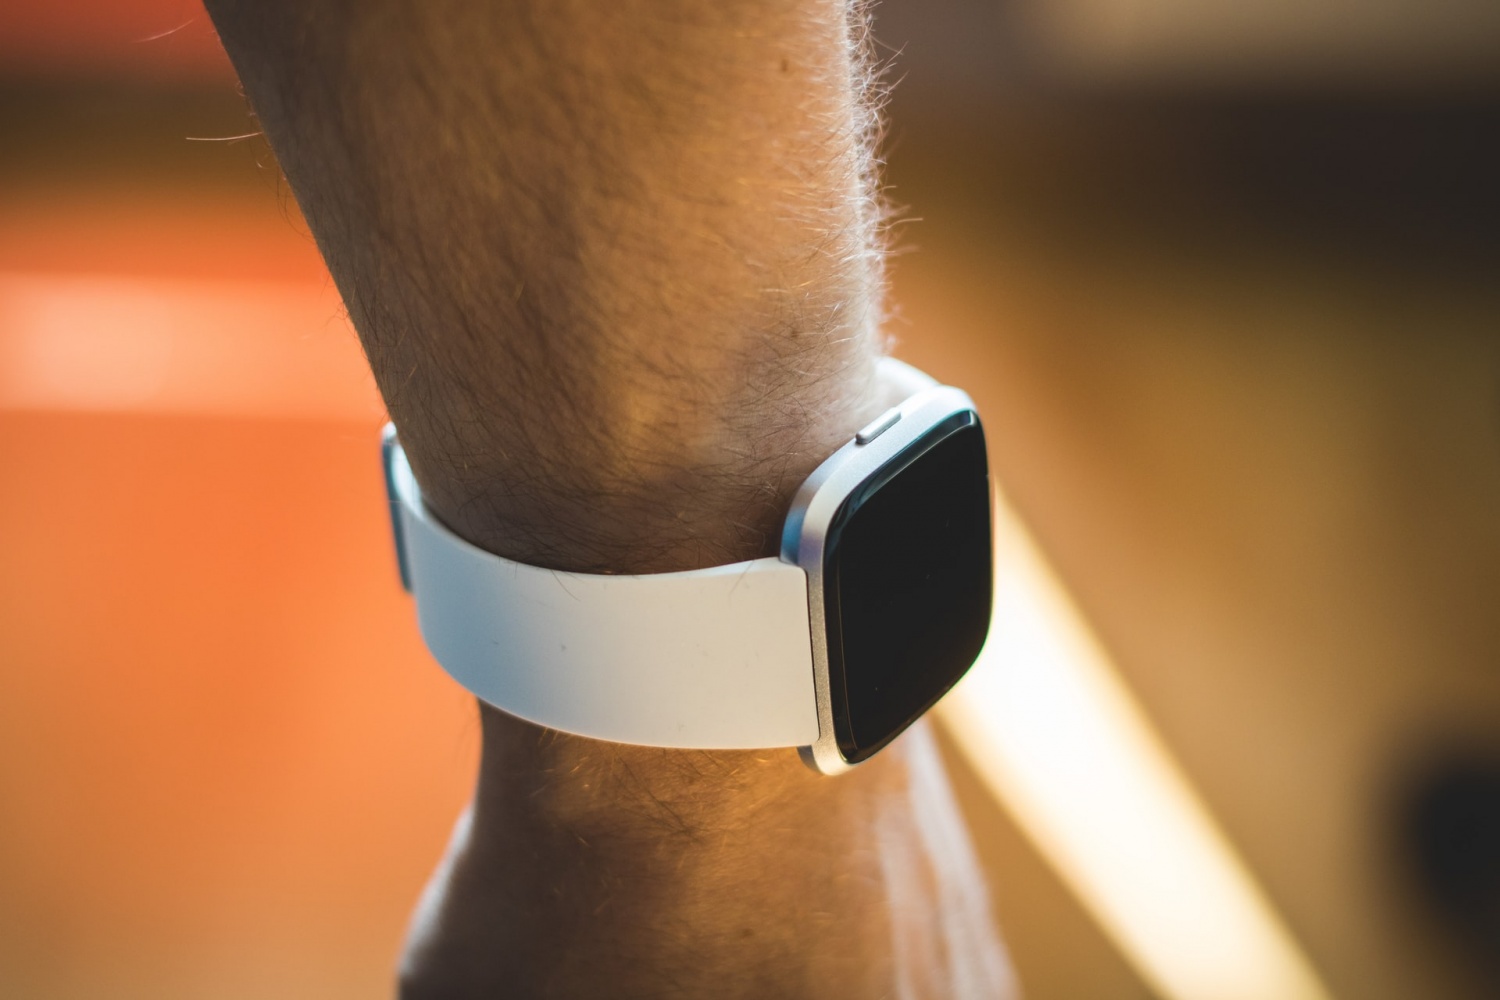 Google's Fitbit Watches Gets Step Closer to Completion After FDA Approves AFib Monitoring